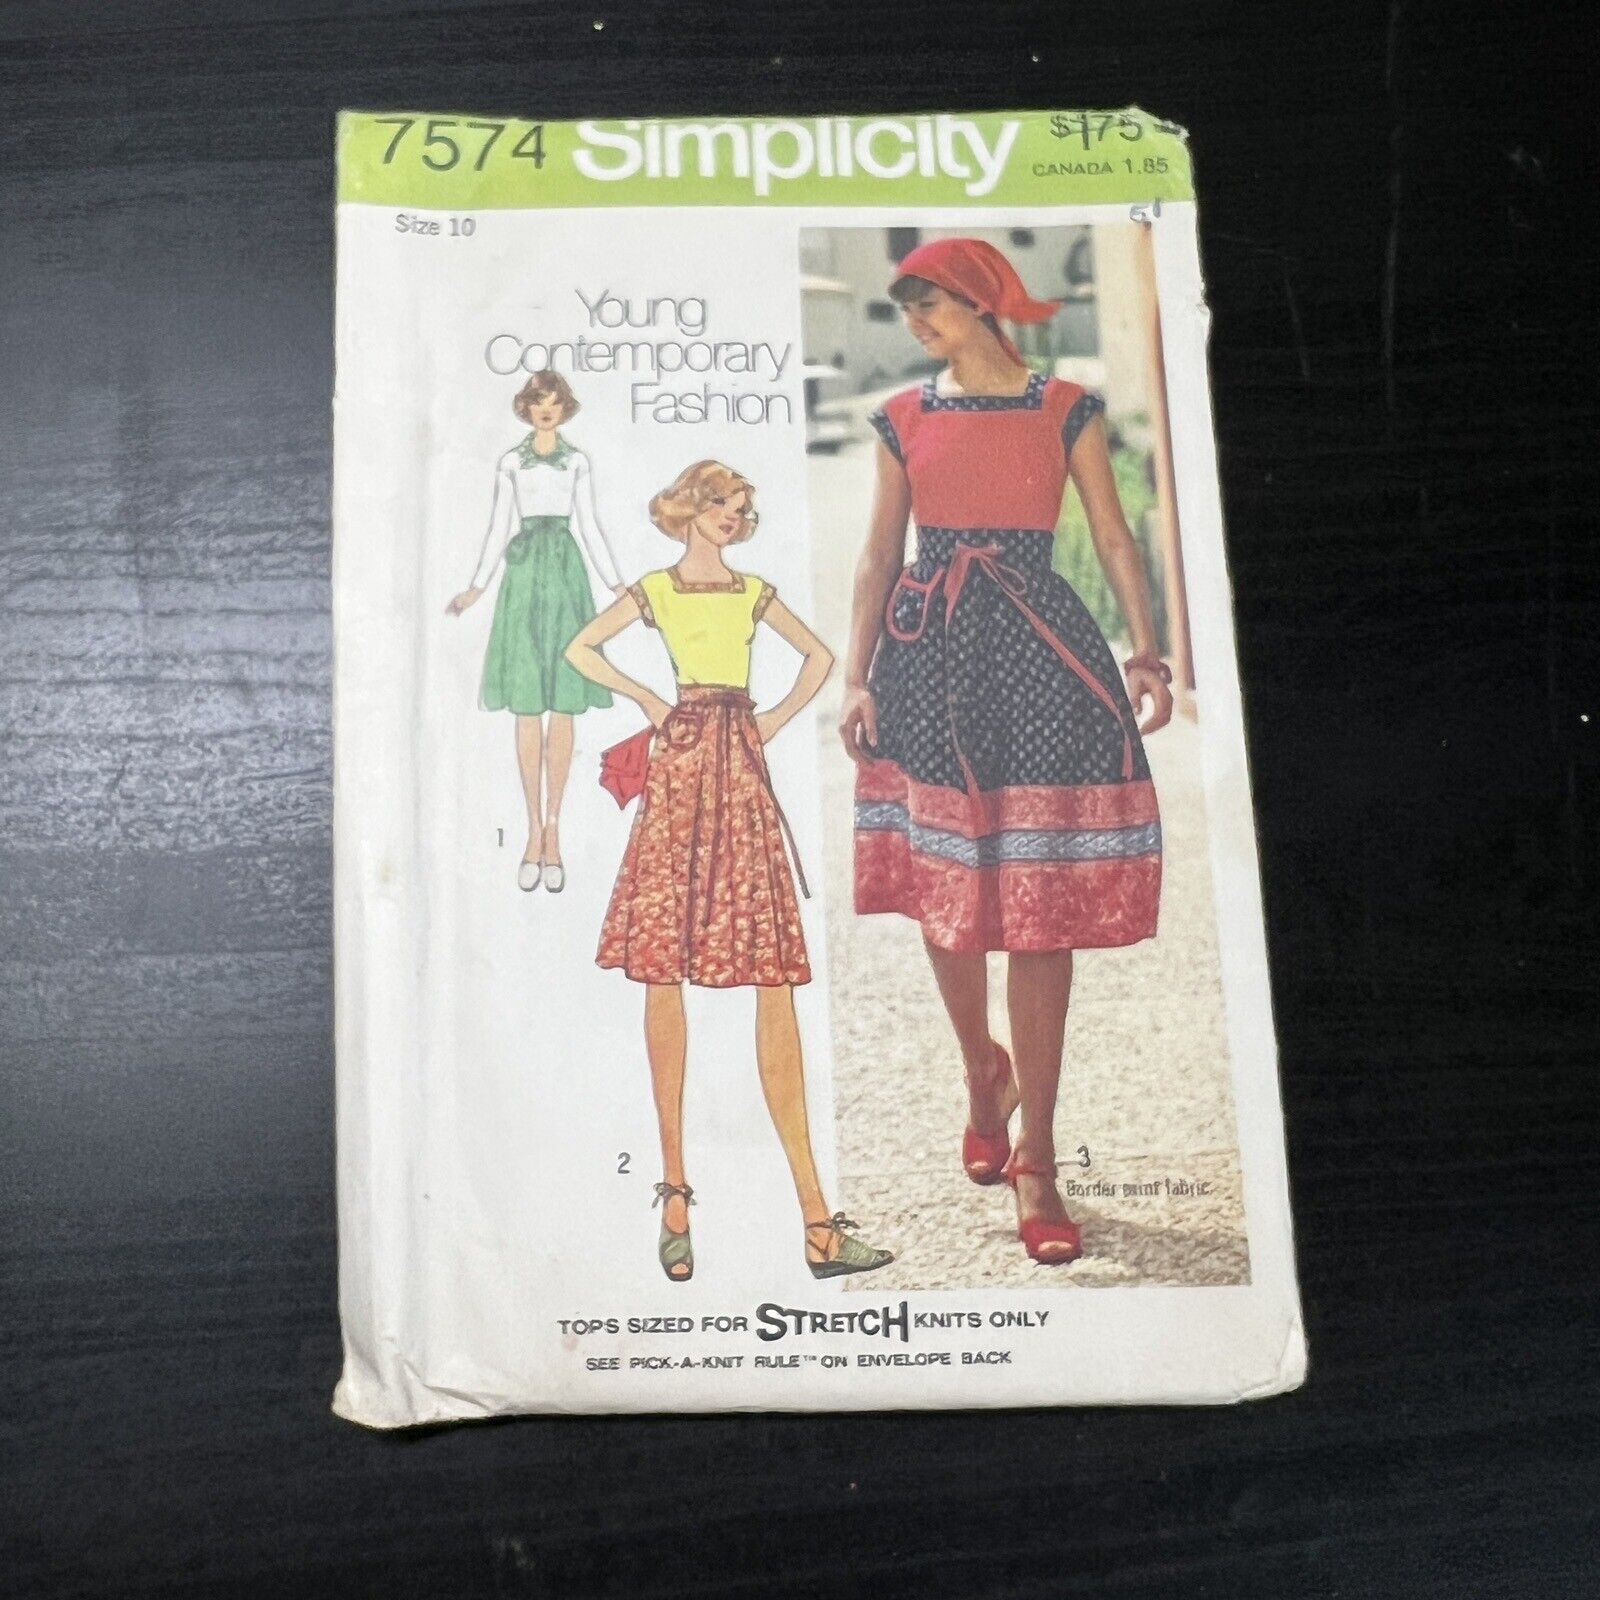 Vintage 1970s Simplicity 7574 Boho Tops Skirt + Scarf Sewing Pattern 10 XS UNCUT